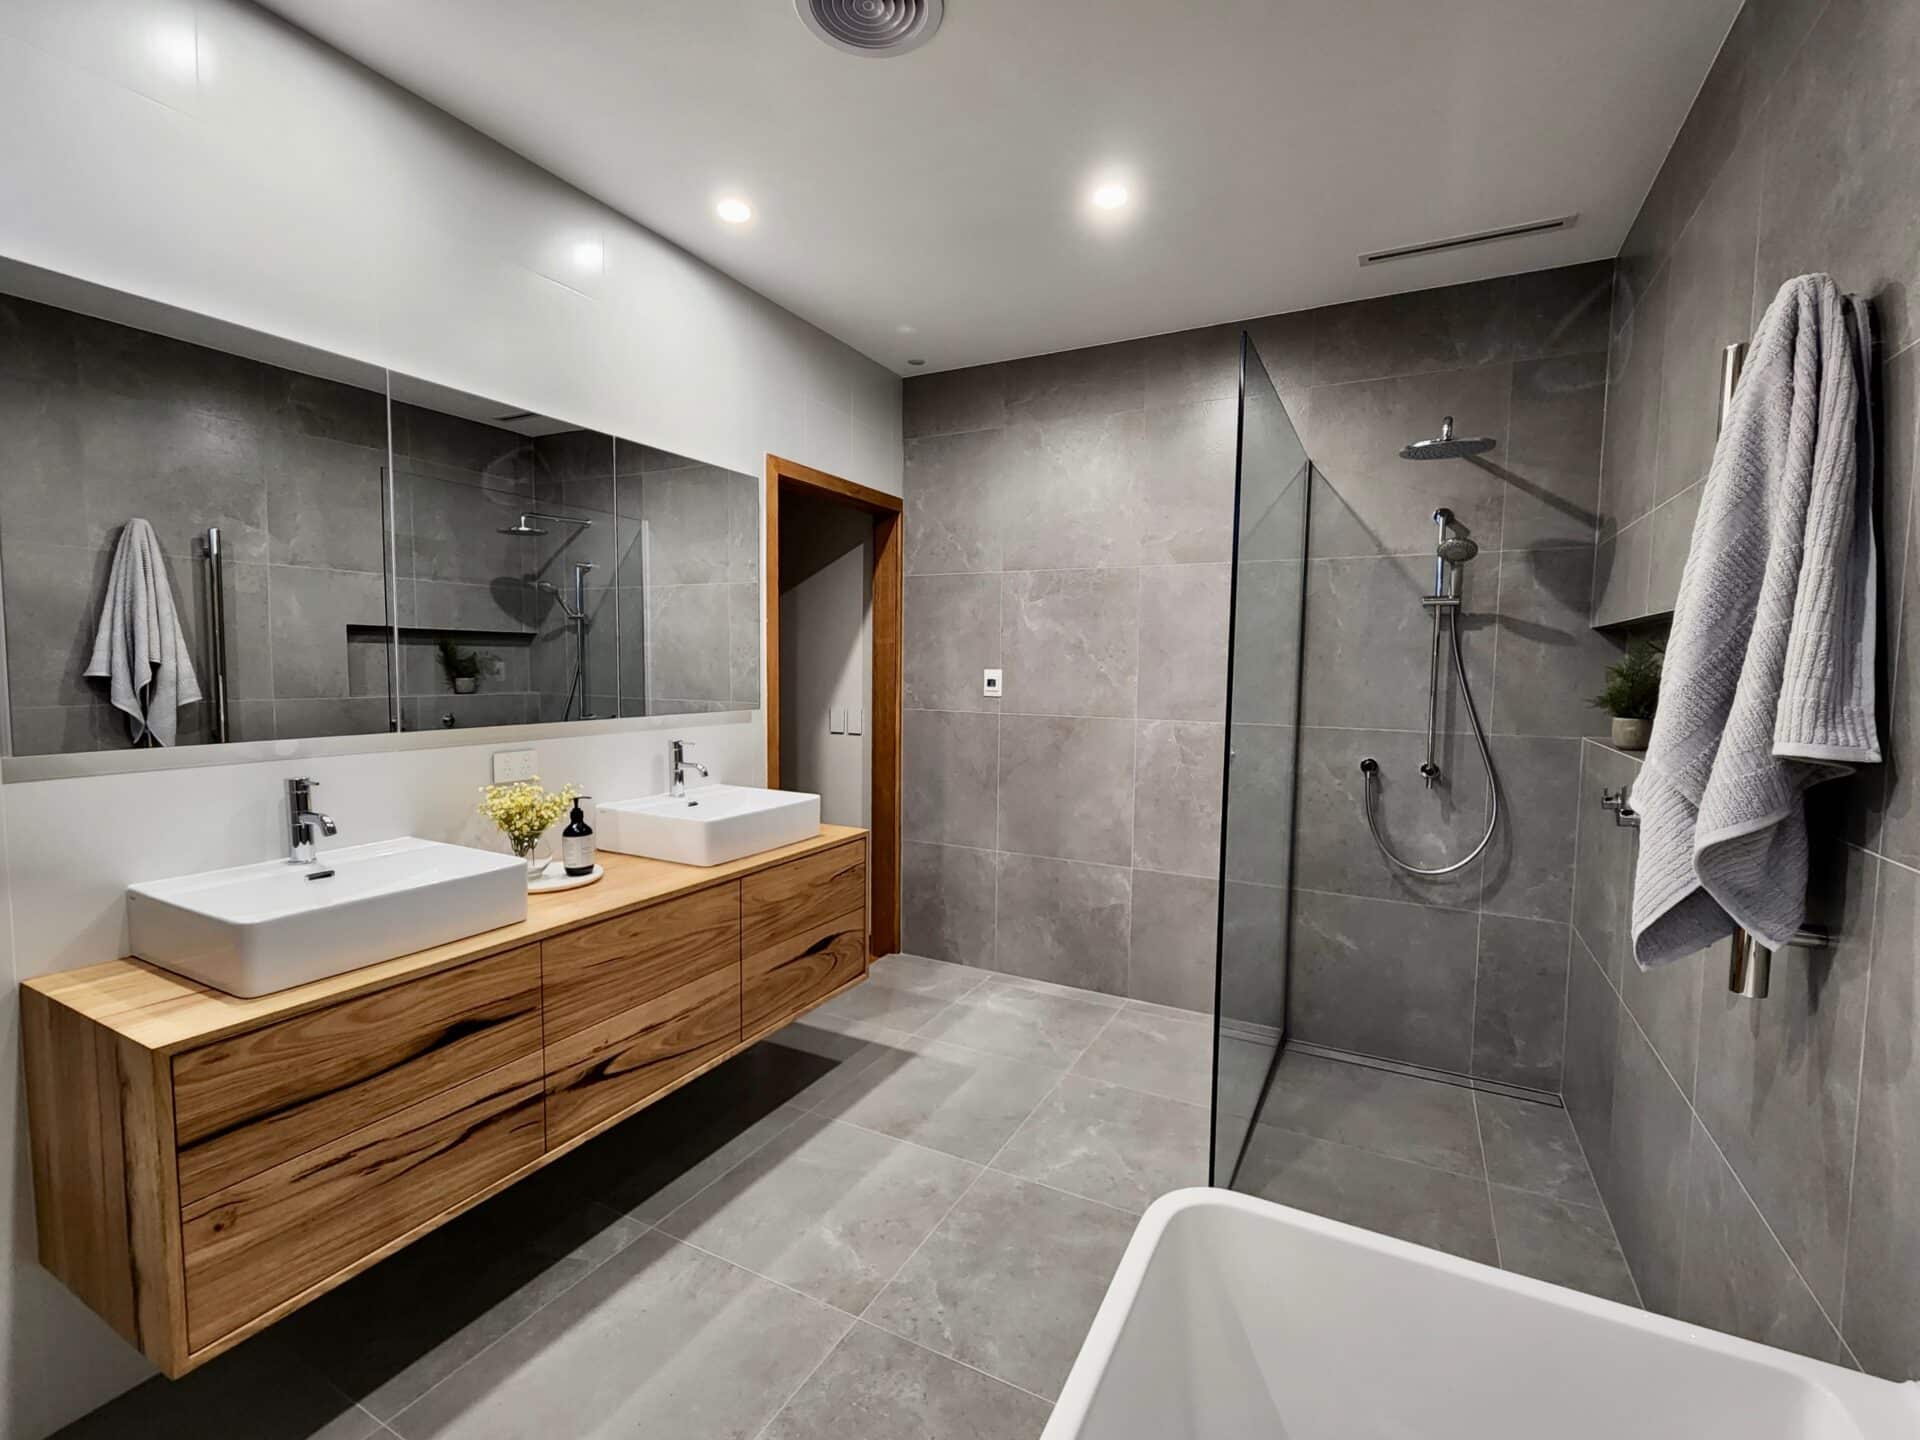 Quality Ensuite Renovation Project In Mount Eliza